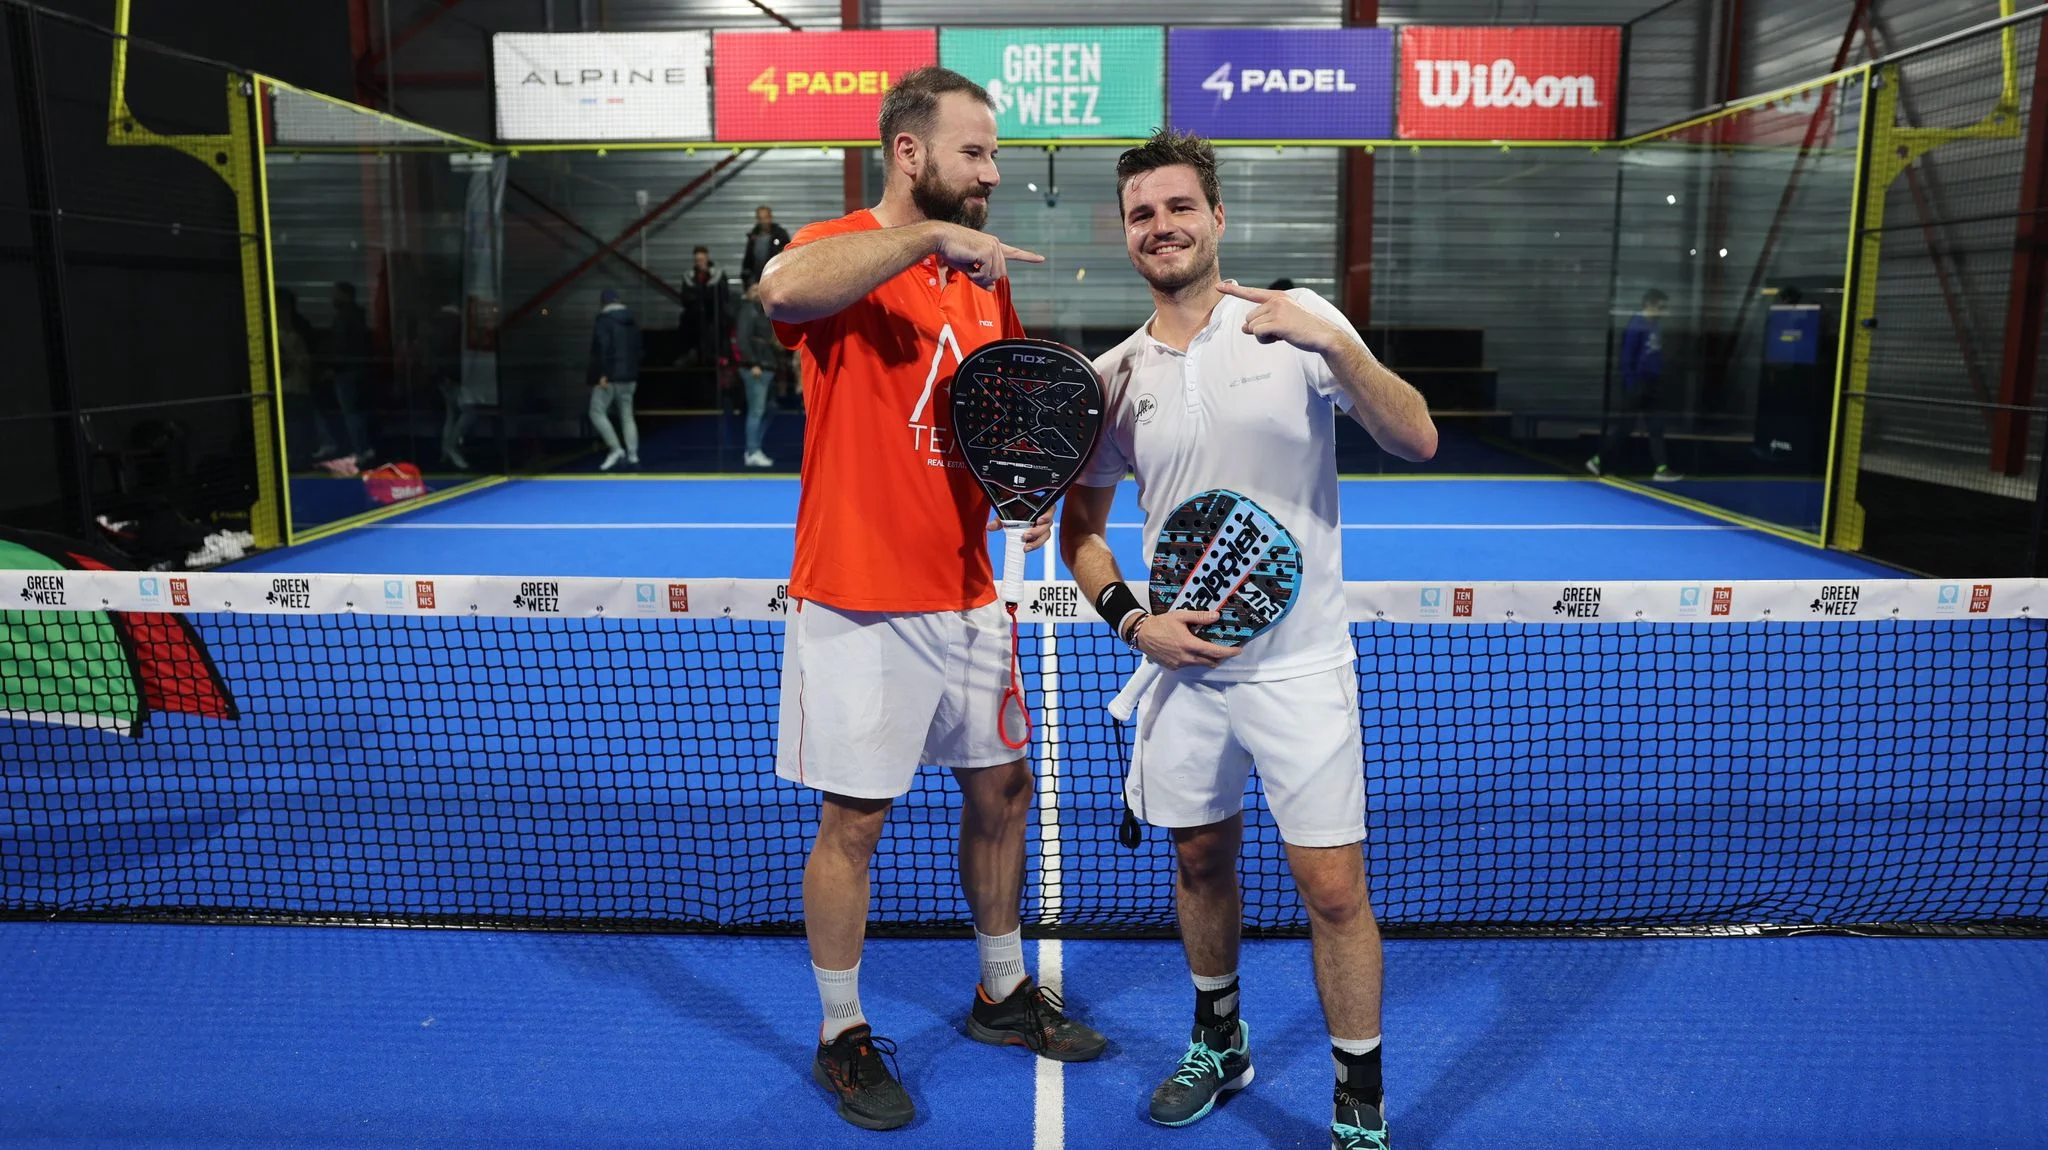 P2000 4PADEL Strasbourg – Bergeron and Maigret, too strong!